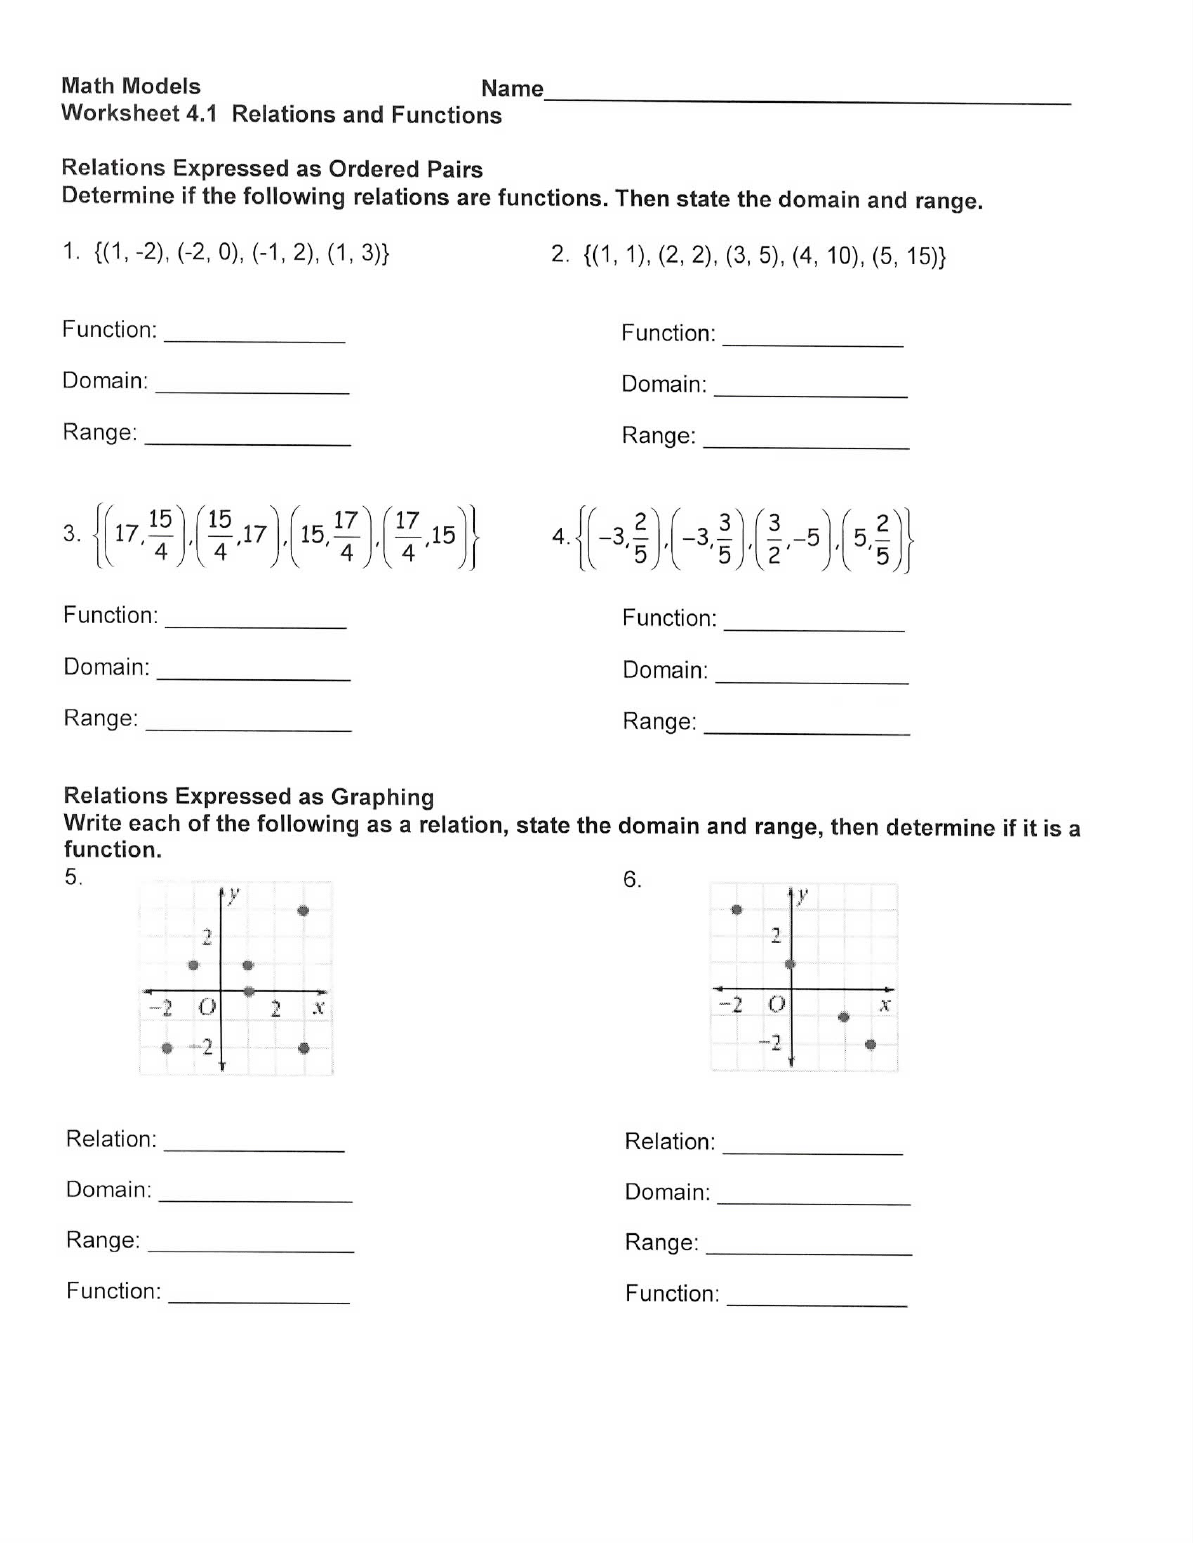 math-models-worksheet-4-1-relations-and-functions-answer-key-function